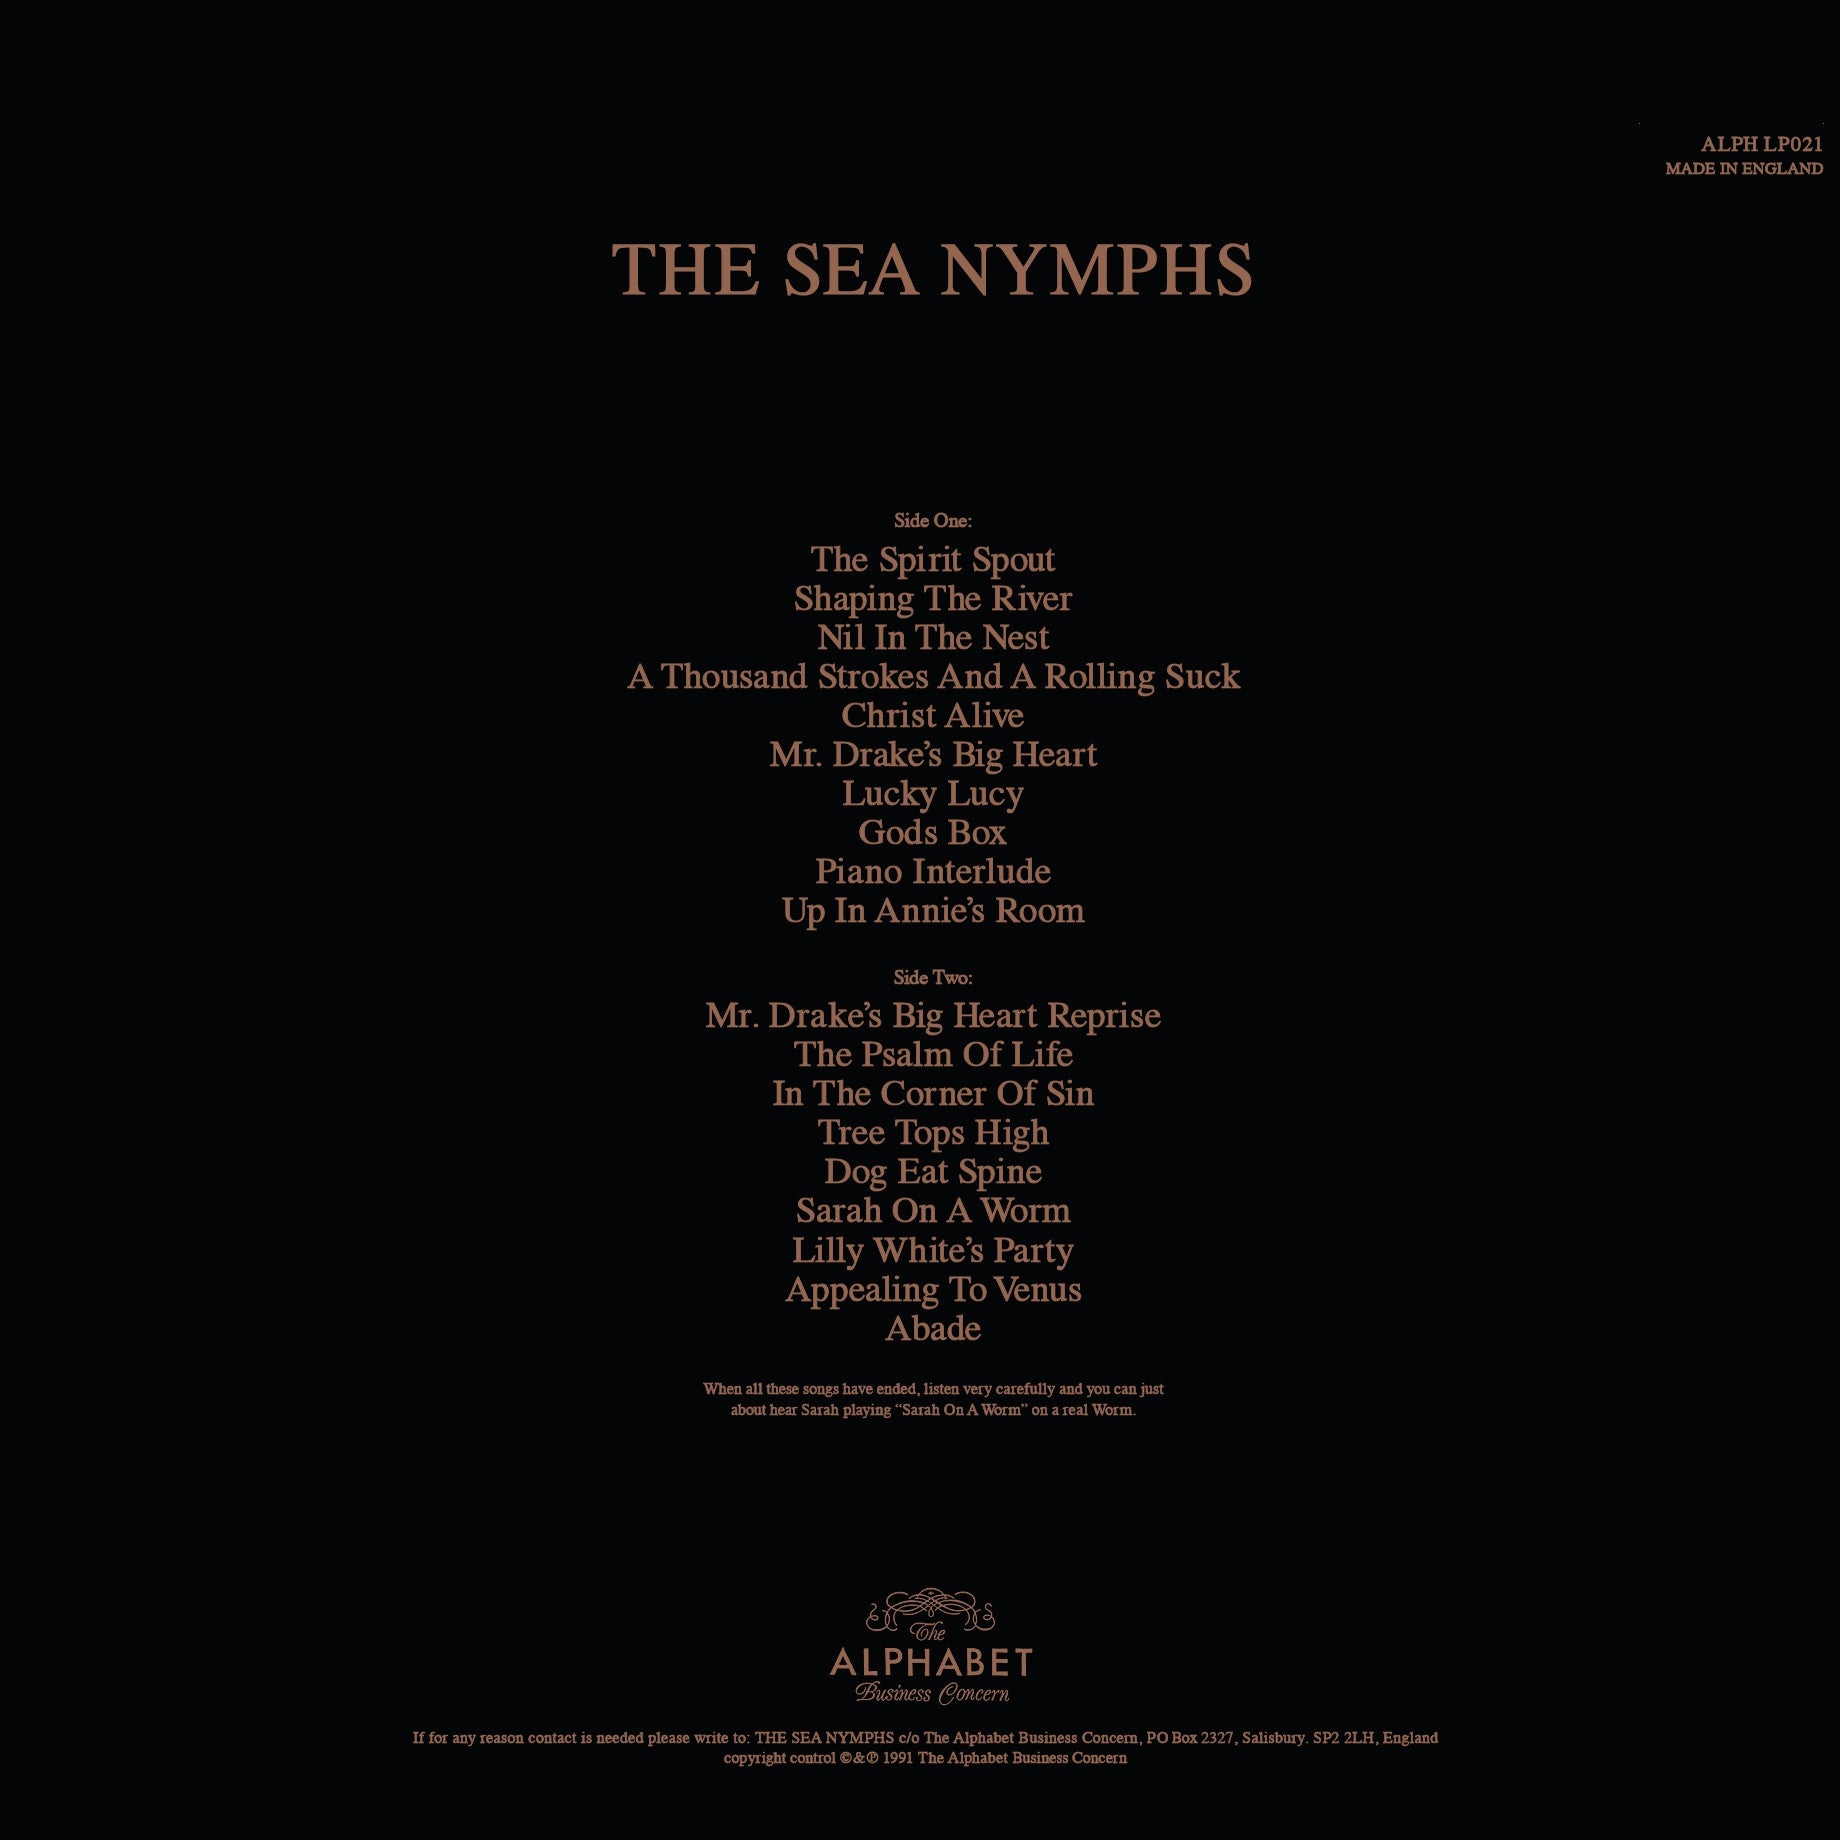 The Sea Nymphs: The Sea Nymphs: LP – The Consultant's Memorabilia Collection